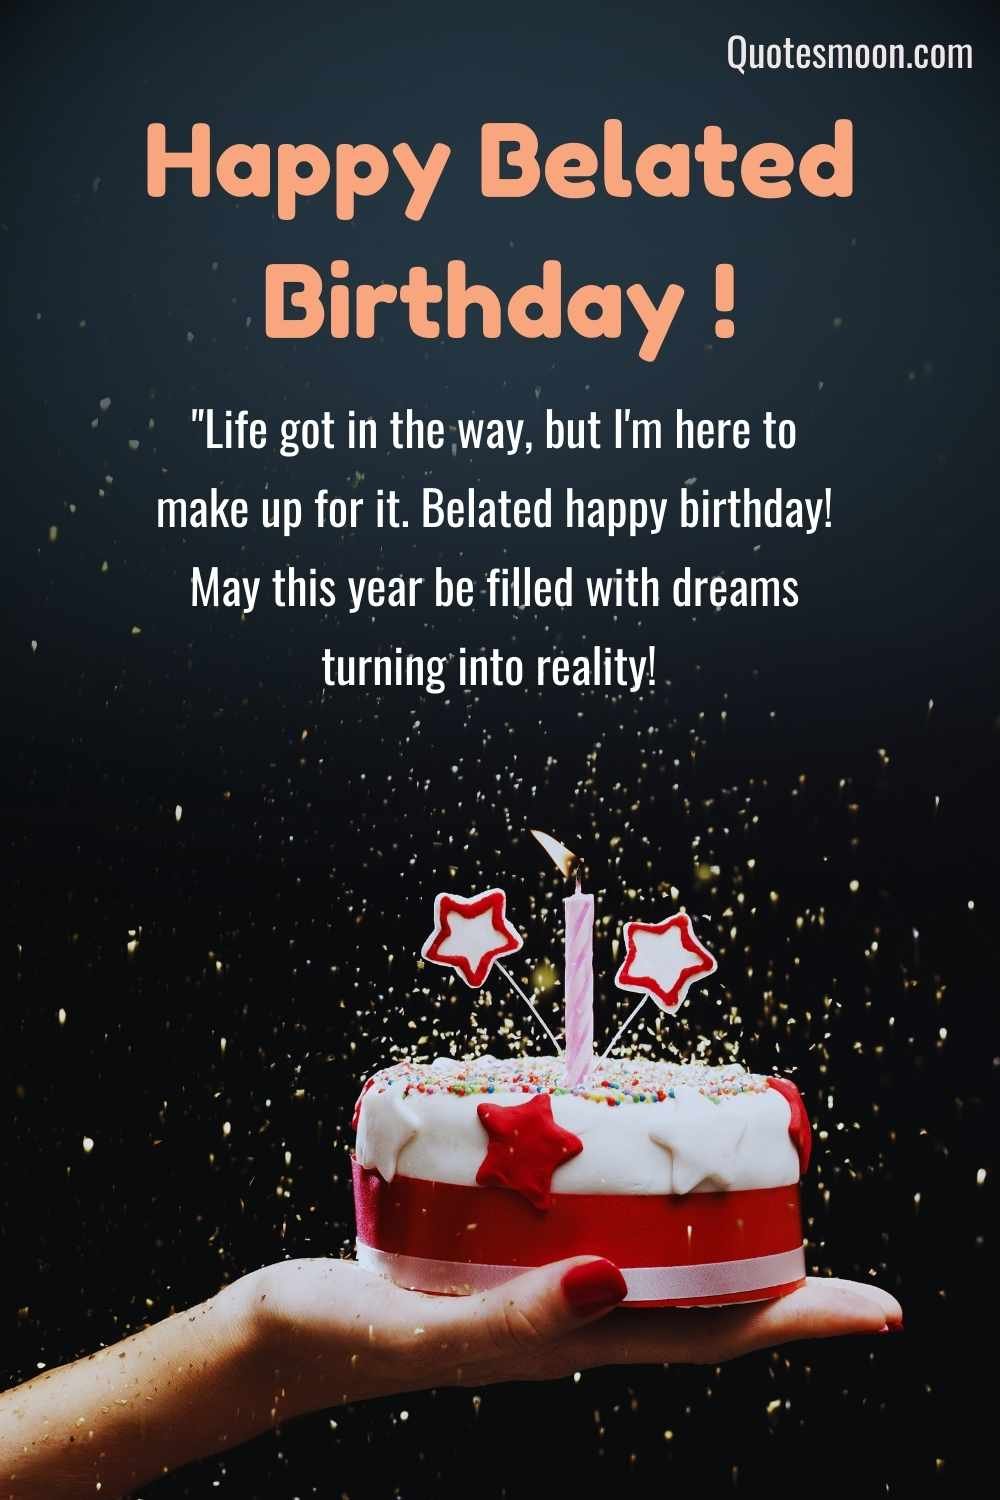 happy belated birthday images for him with quotes